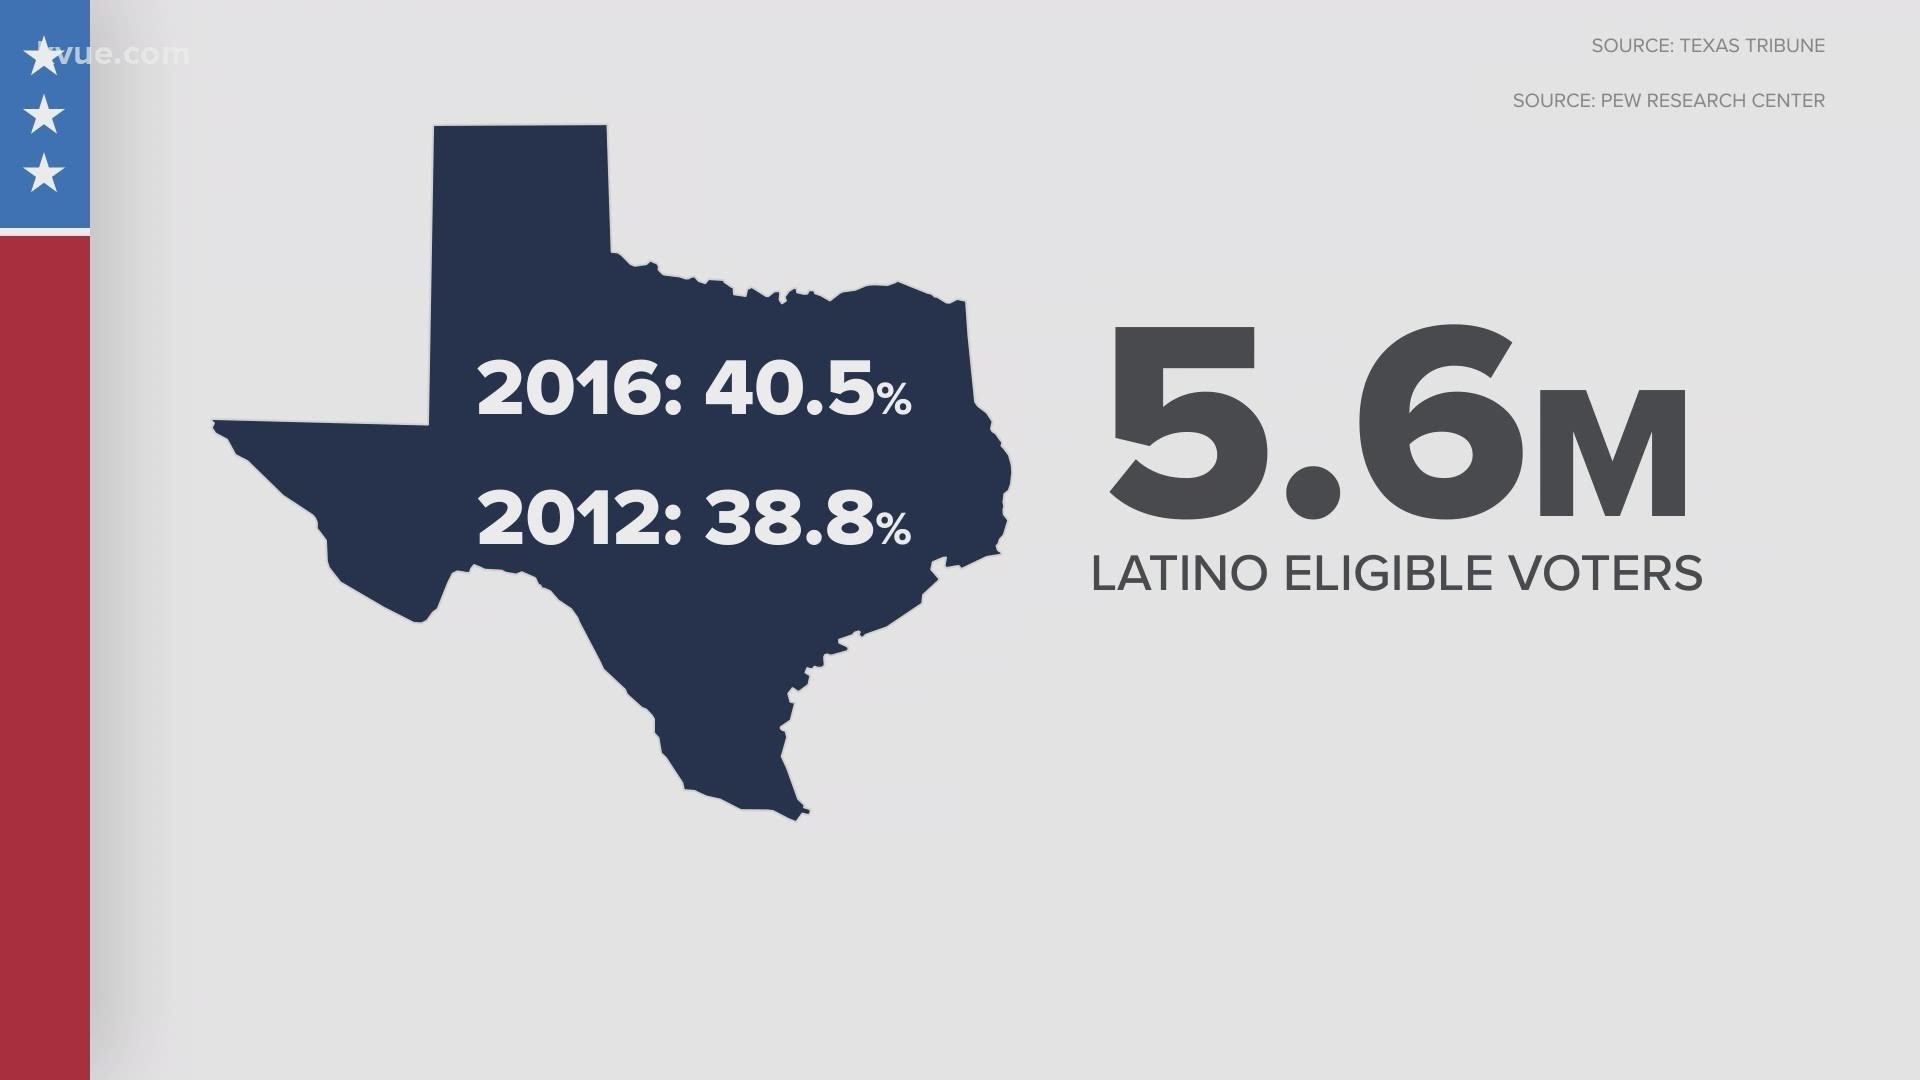 Some South Texas counties, which have a higher Hispanic/Latino population, flipped from blue in 2016 to red in 2020. But experts say more data is needed.